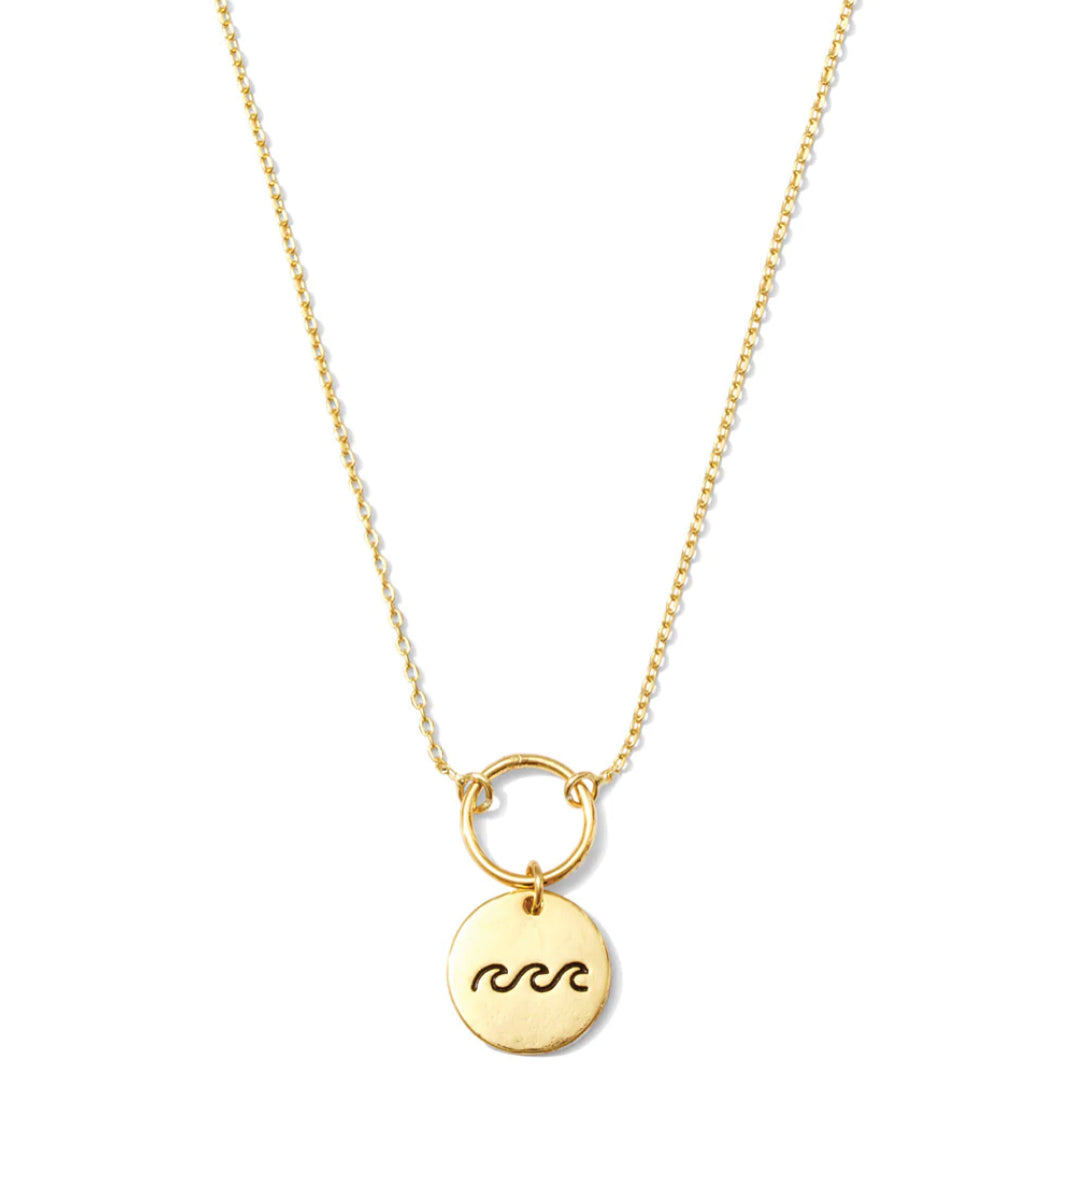 Engraved Pendant Necklace w/Small Ring, Gold